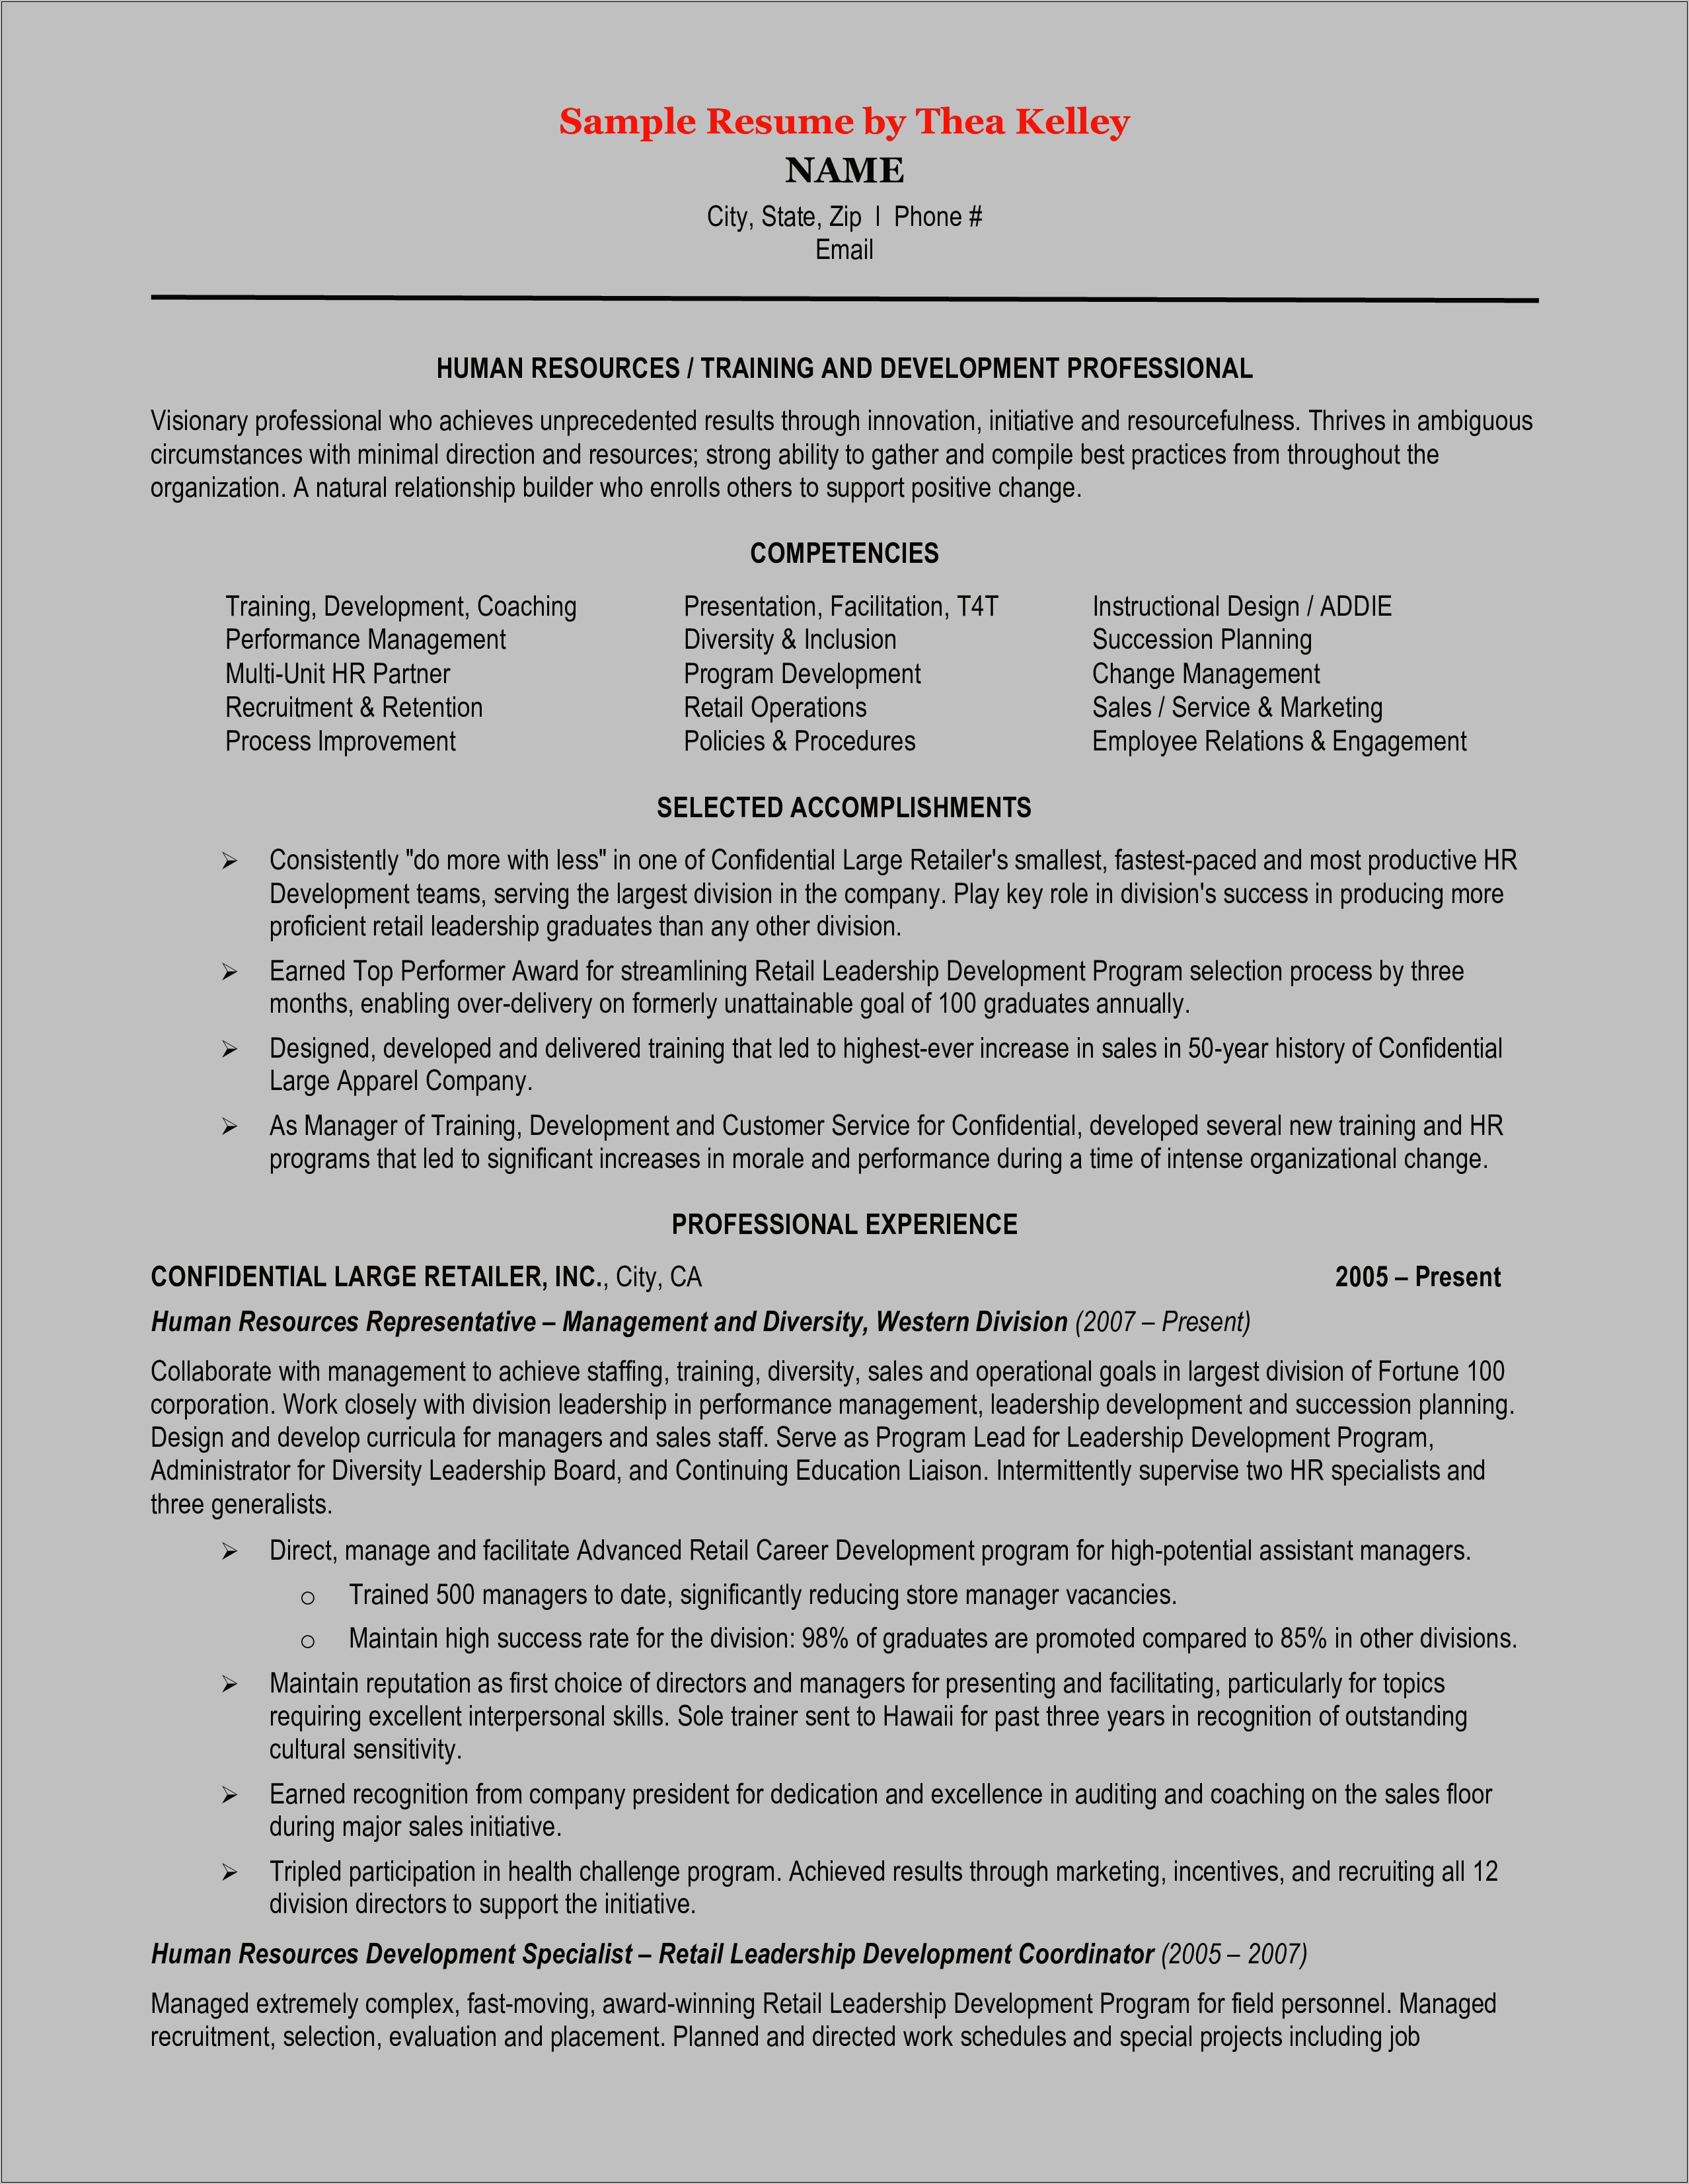 Best Human Resource Manager Resume Sample